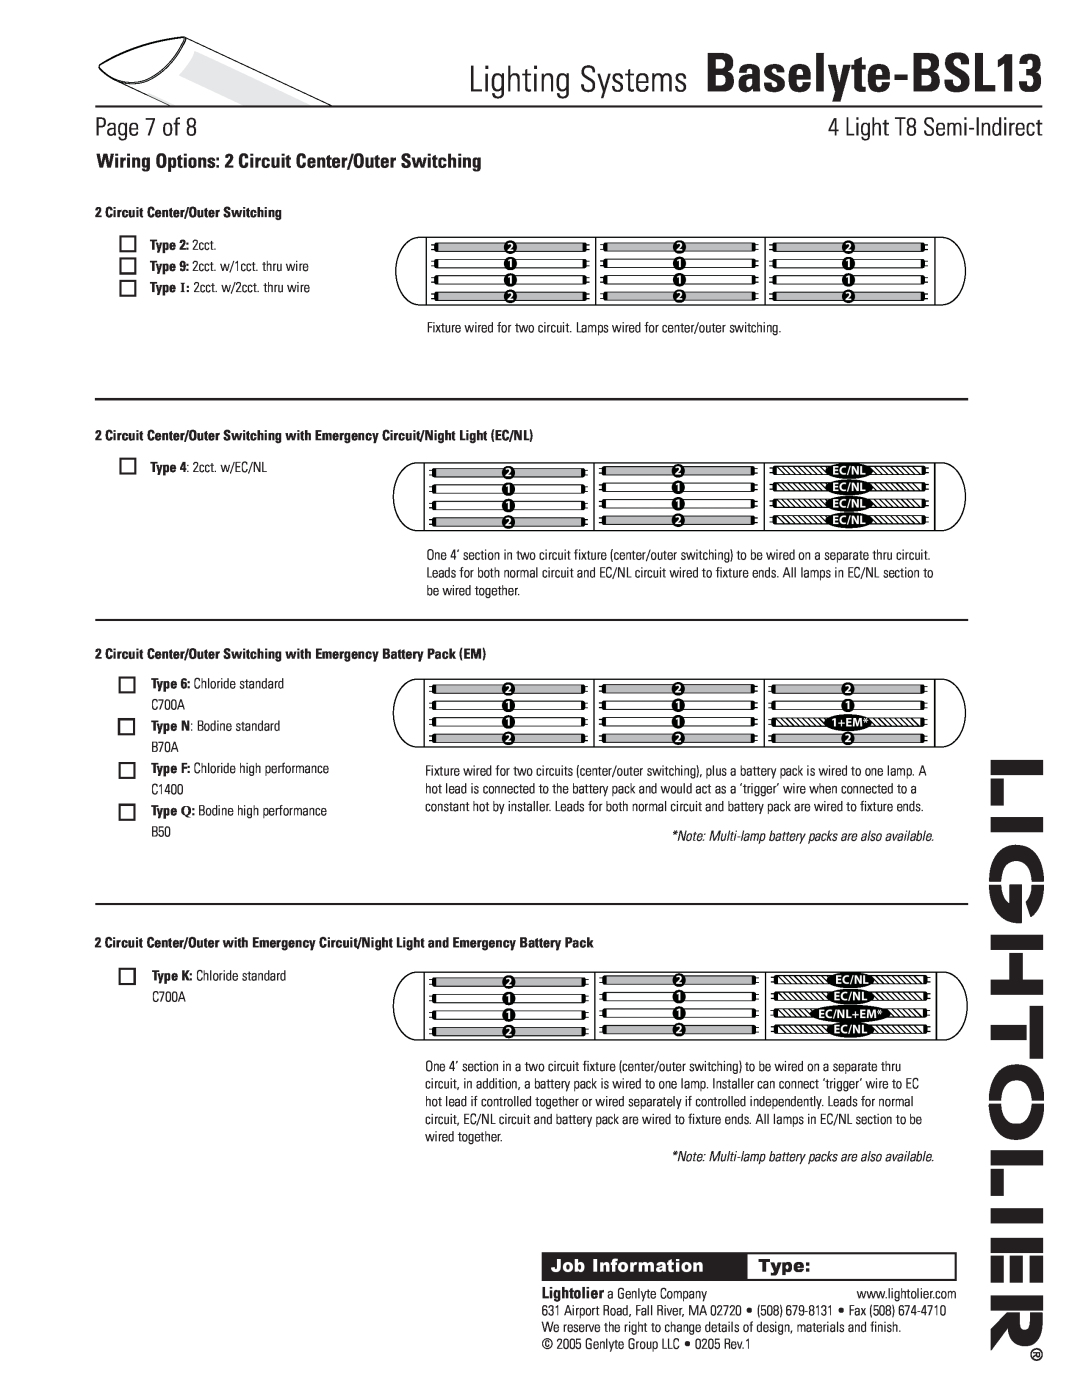 Lightolier Baselyte-BSL13 Wiring Options 2 Circuit Center/Outer Switching, Circuit Center/Outer Switching Type 2 2cct 